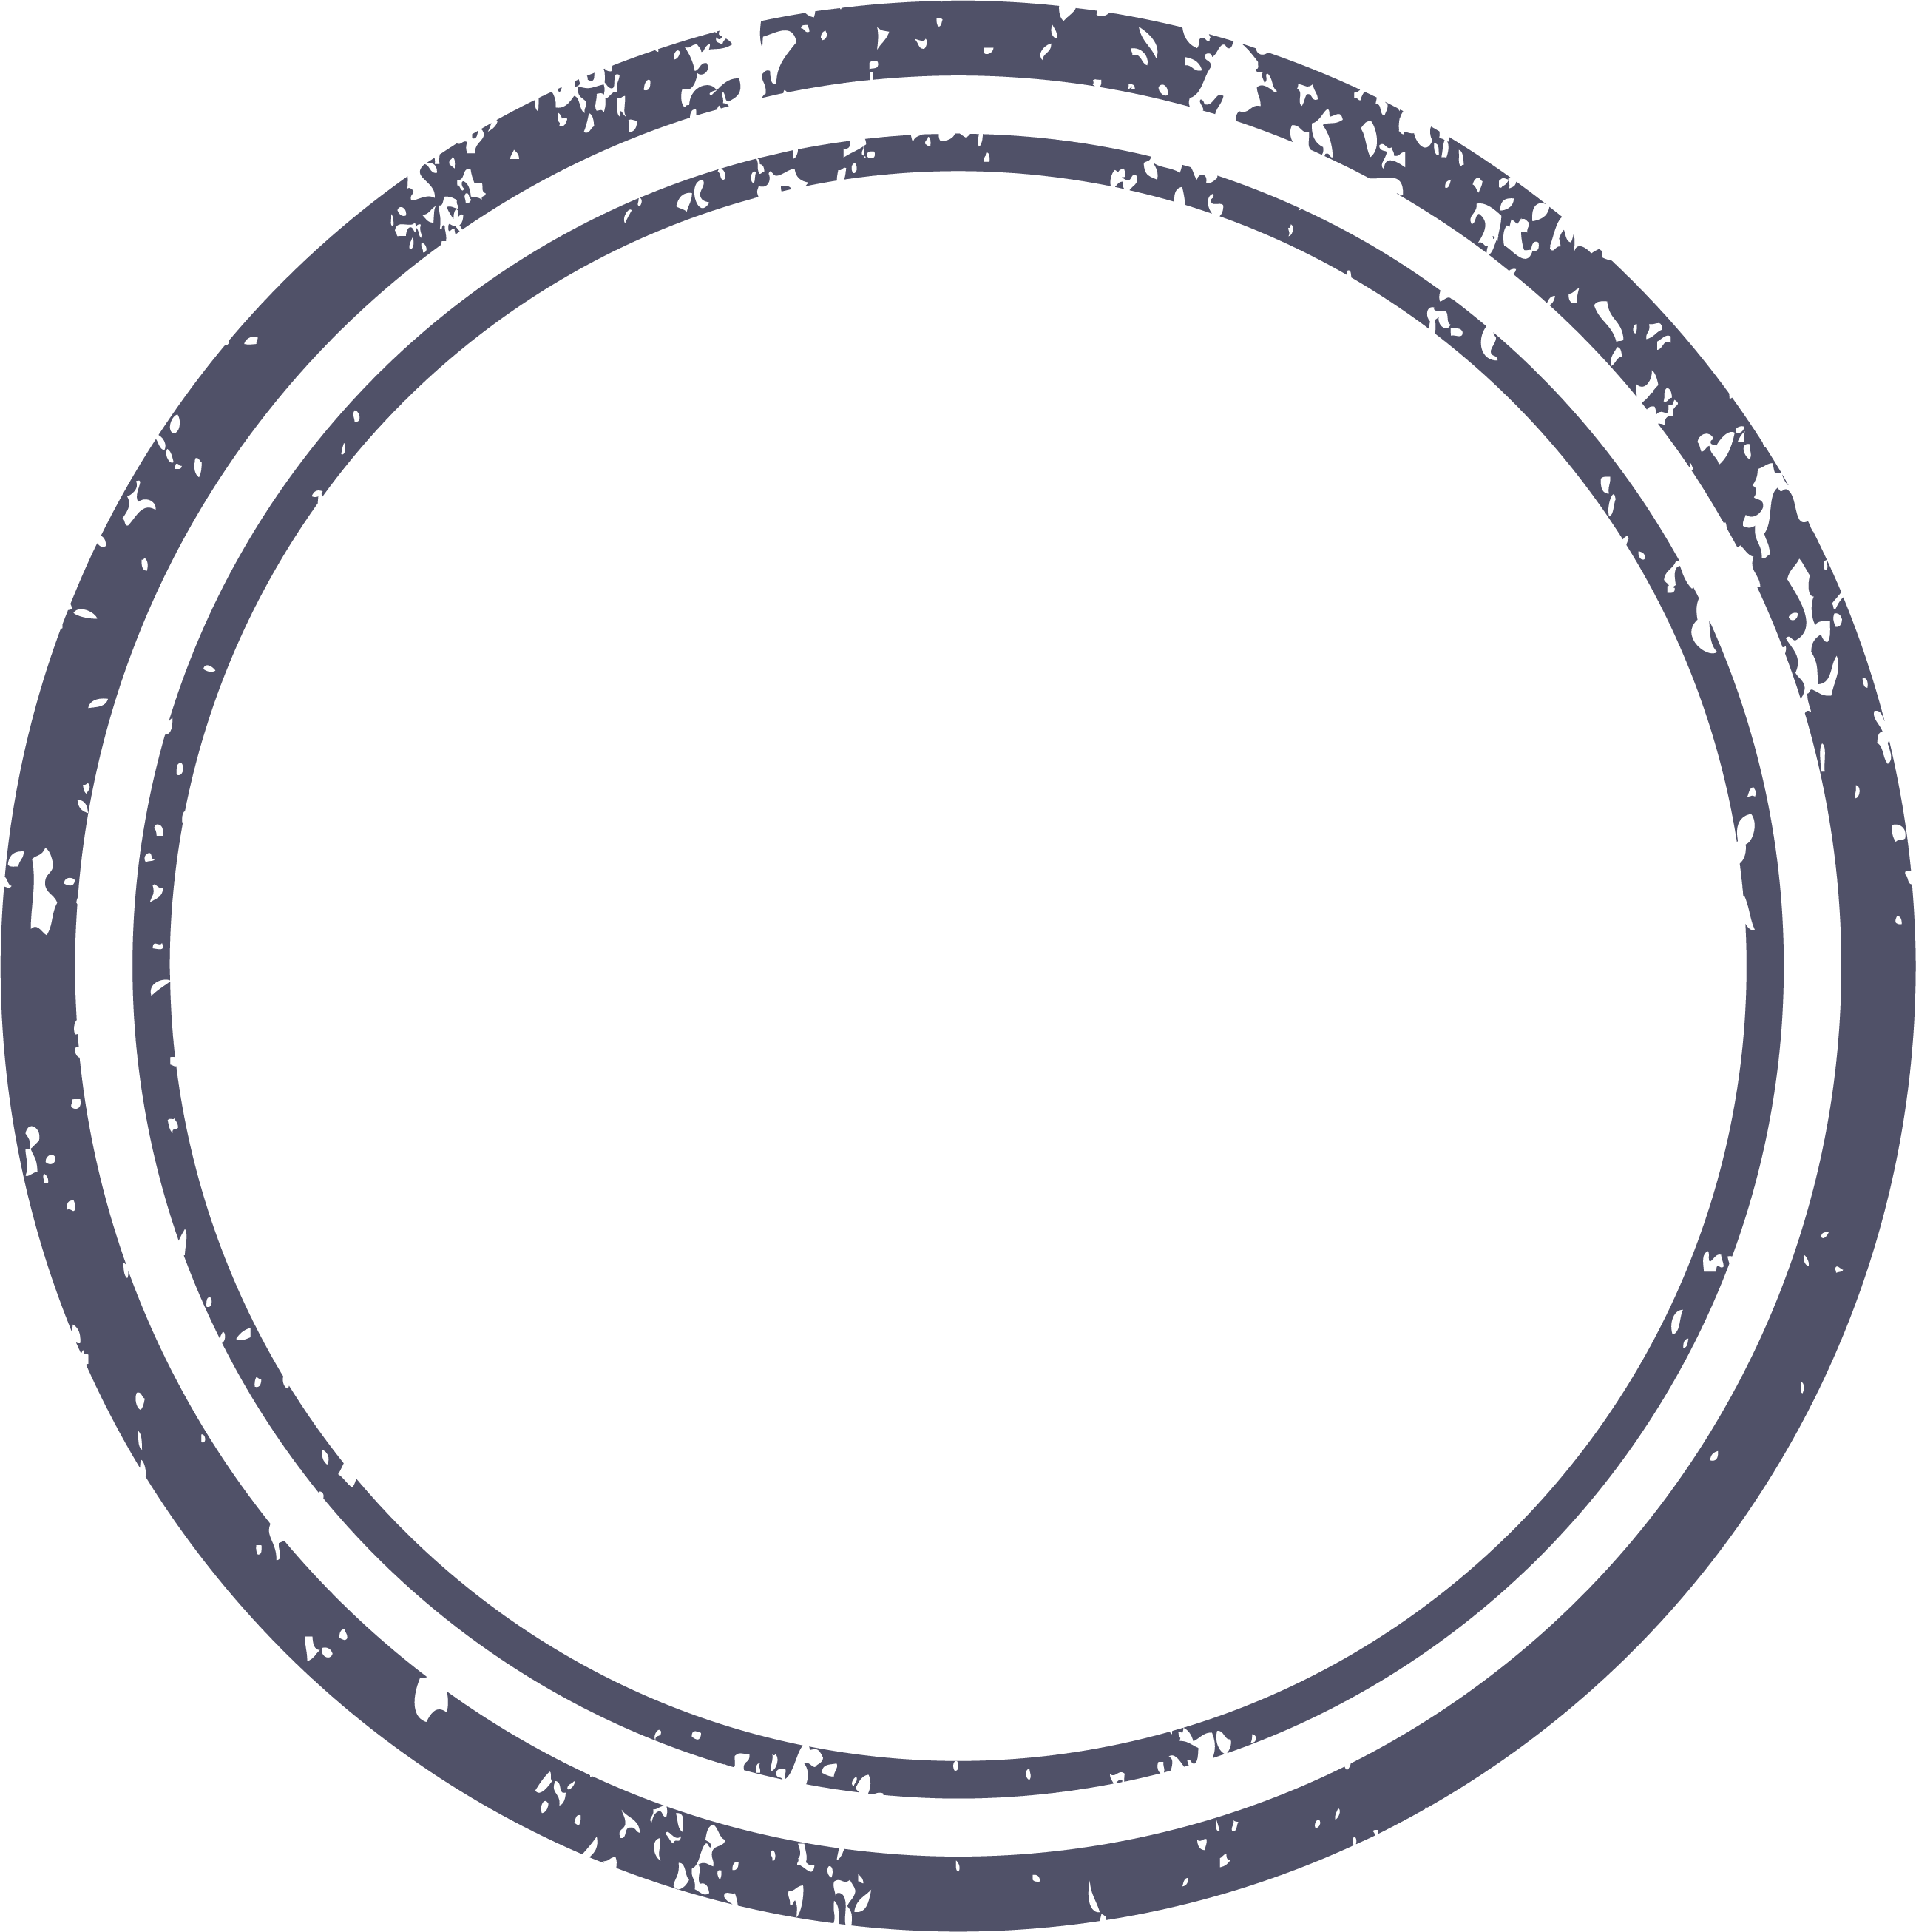 Round Circle Png Images Transparent Background Png Play - Riset